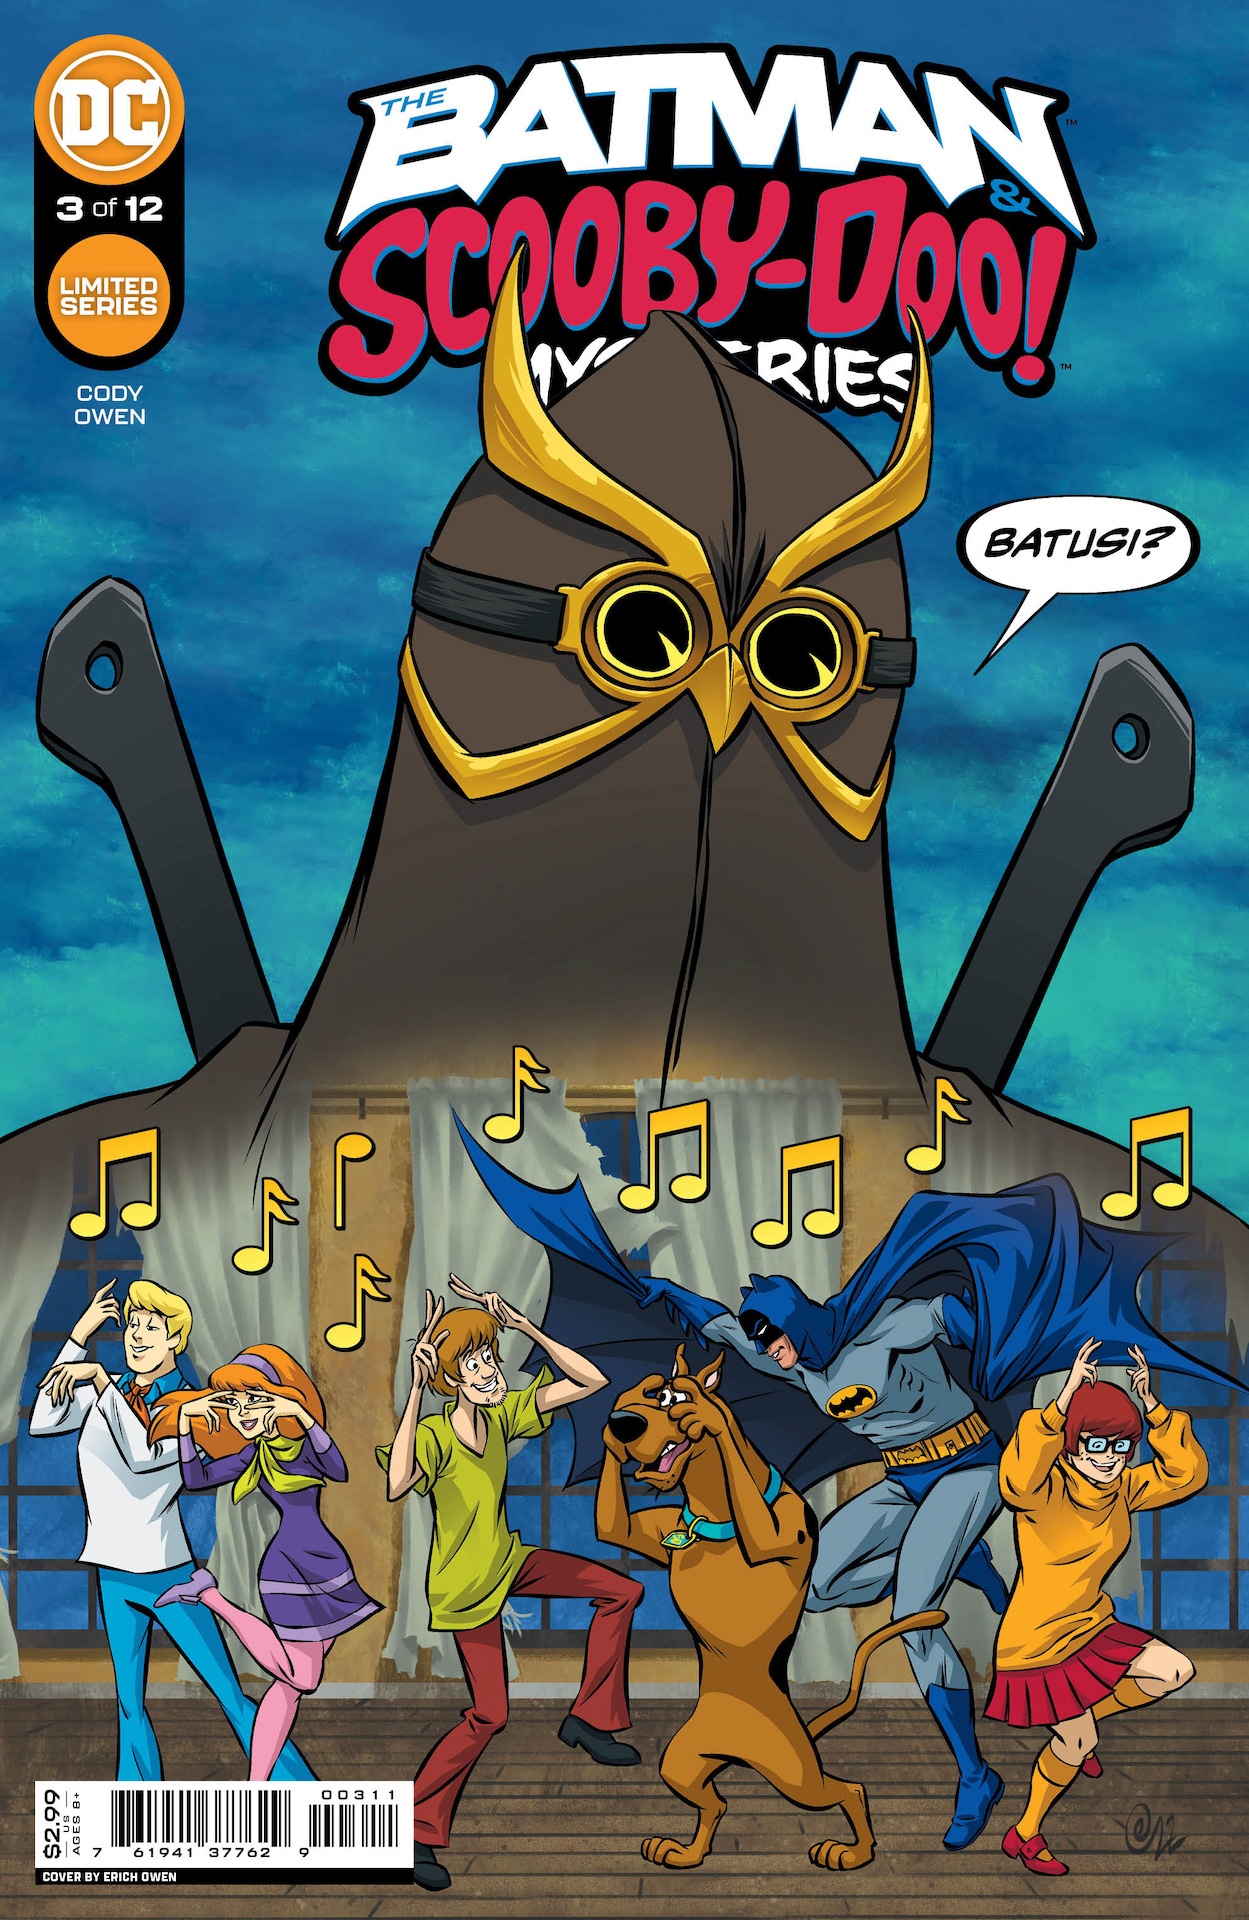 DC Preview: The Batman & Scooby-Doo Mysteries #3